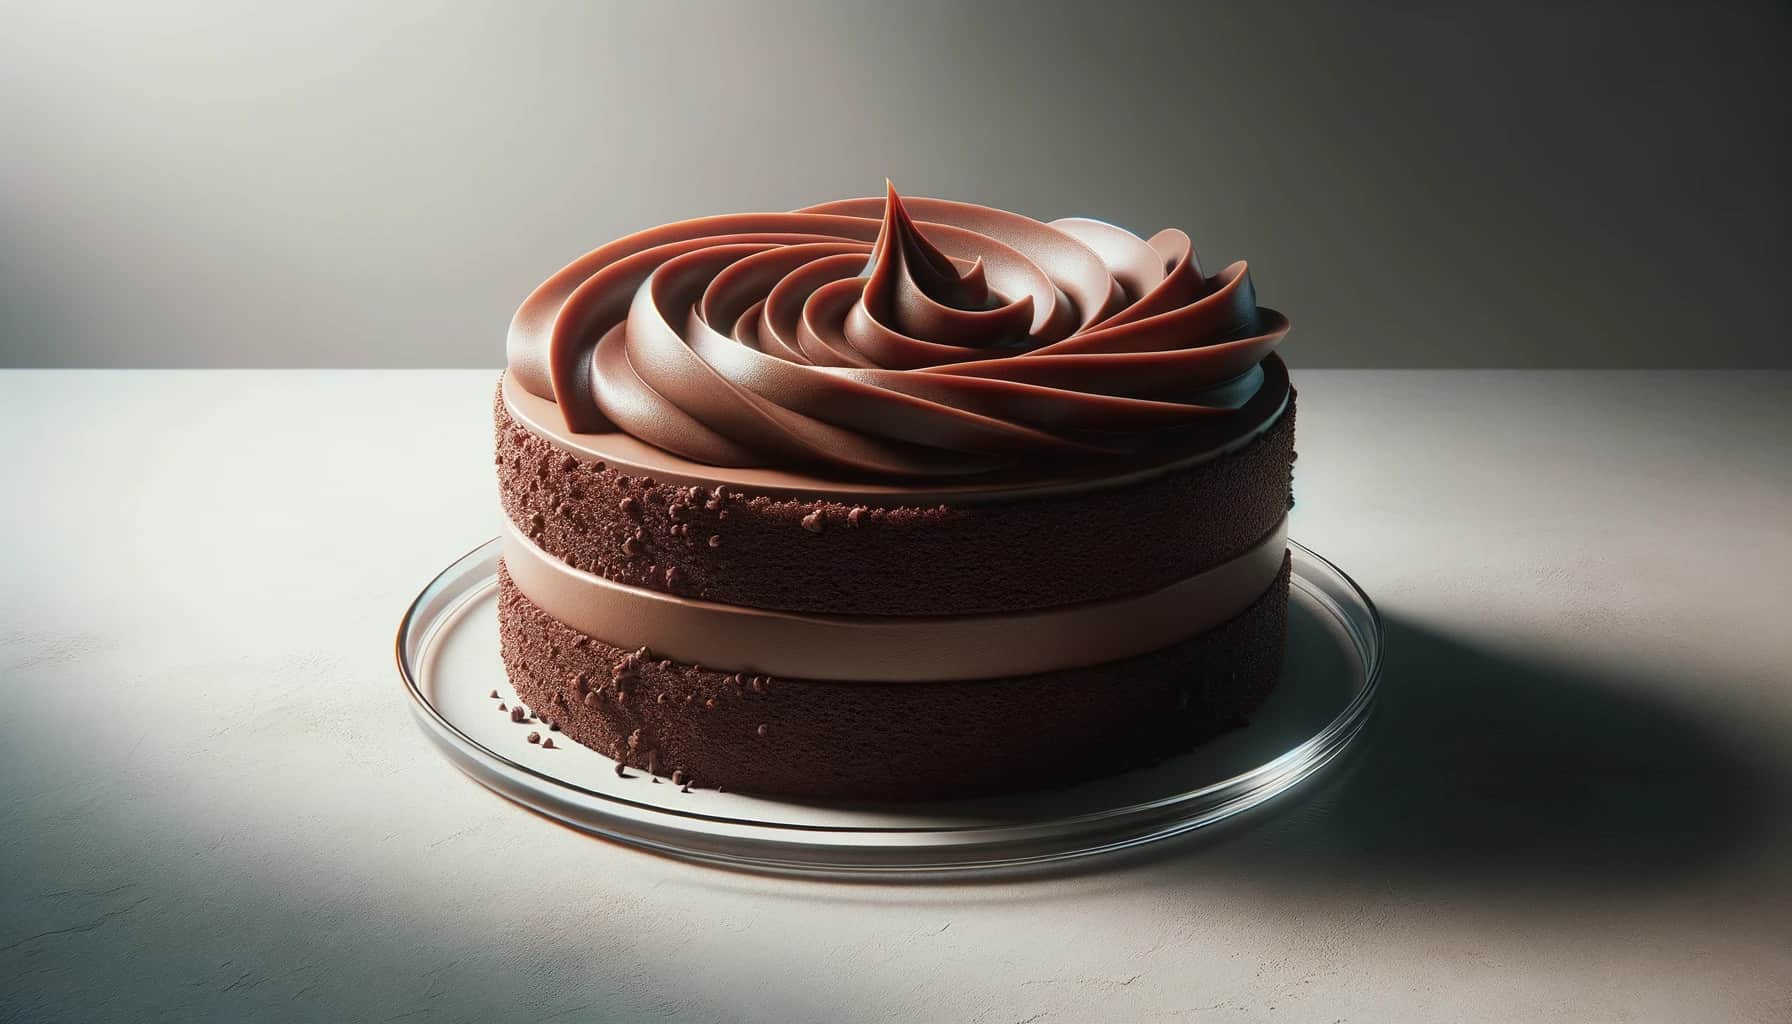 A healthy chocolate cake, elegantly plated on a glass dish, set against a neutral backdrop. The cake has a luscious chocolate color, complemented by a velvety frosting.